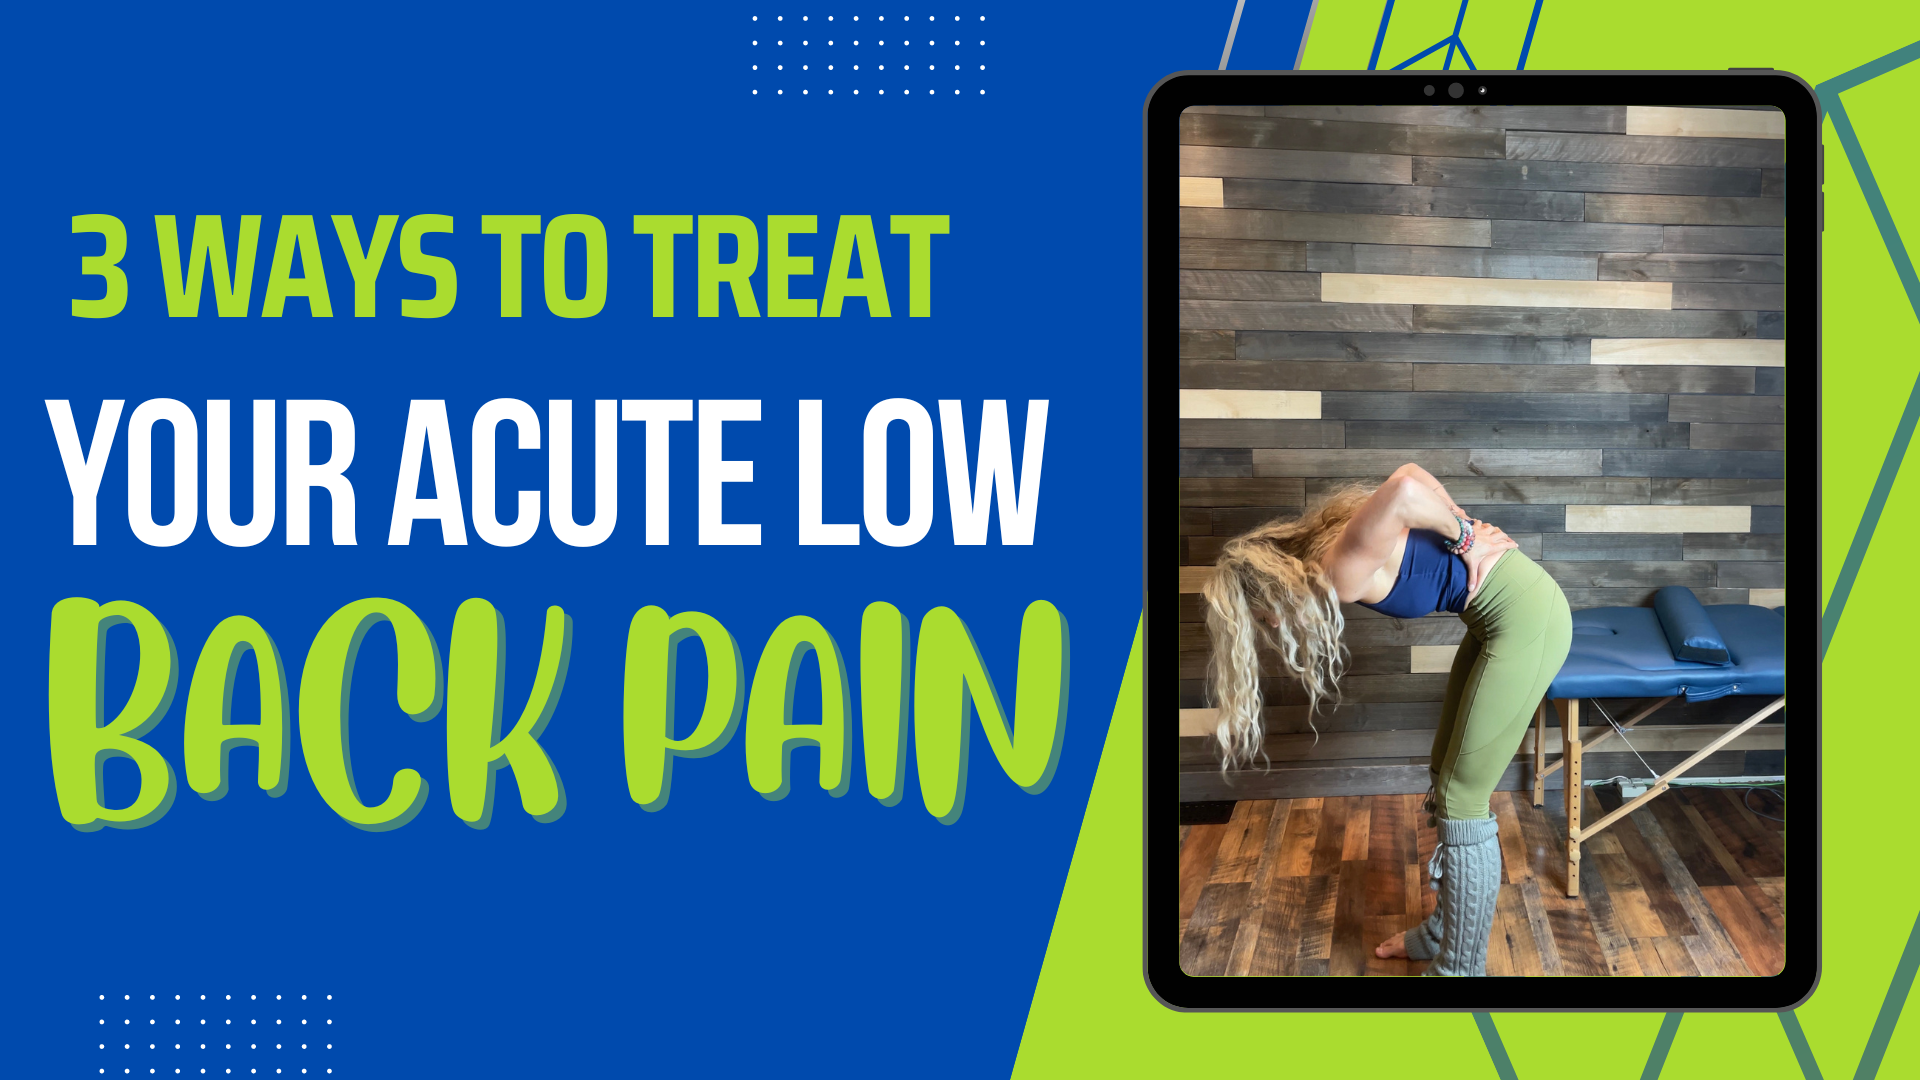 3 ways to treat your acute low back pain